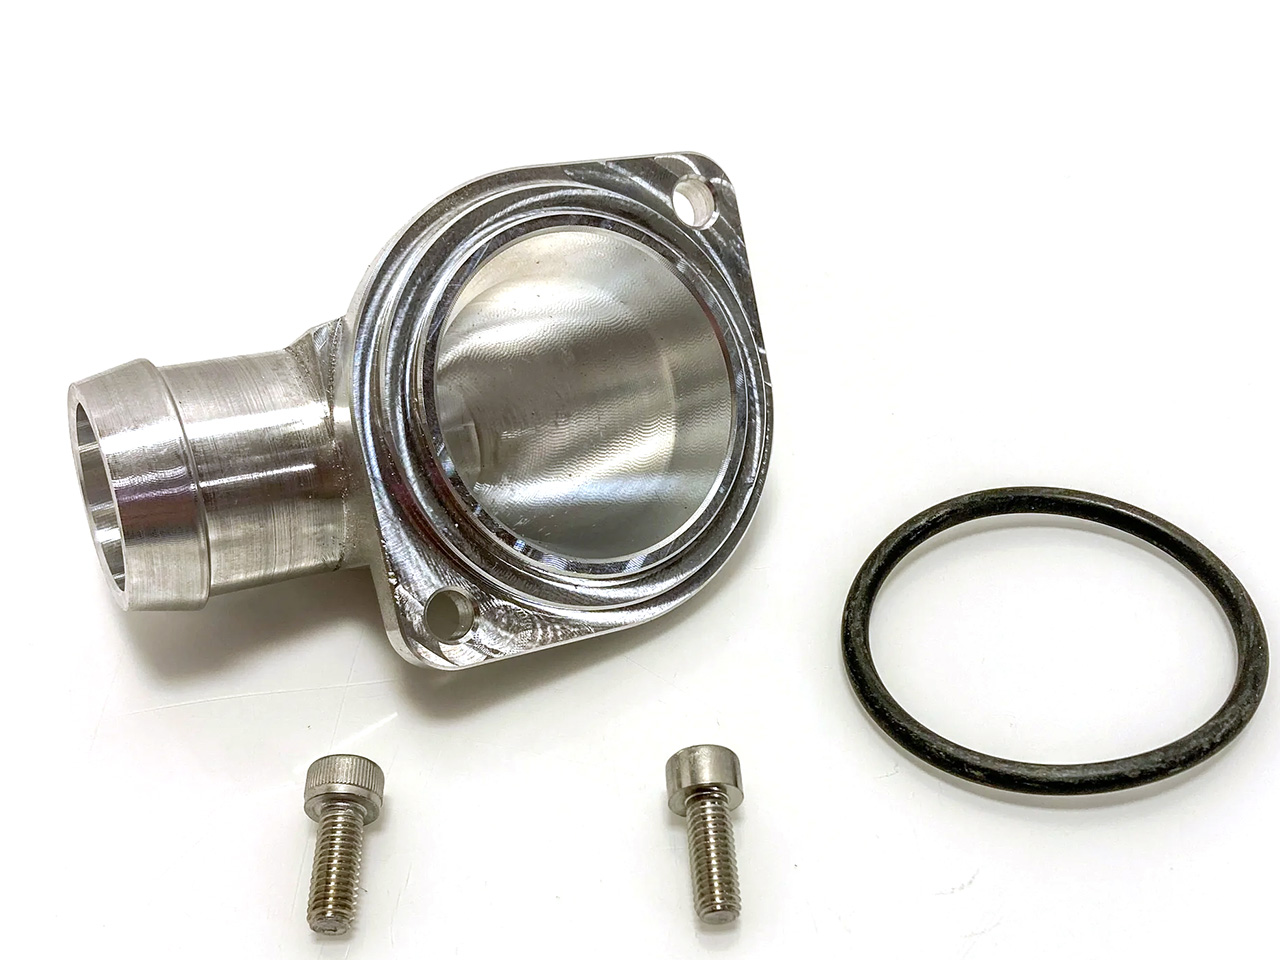 VW early 4-cyl billet thermo housing + o-ring